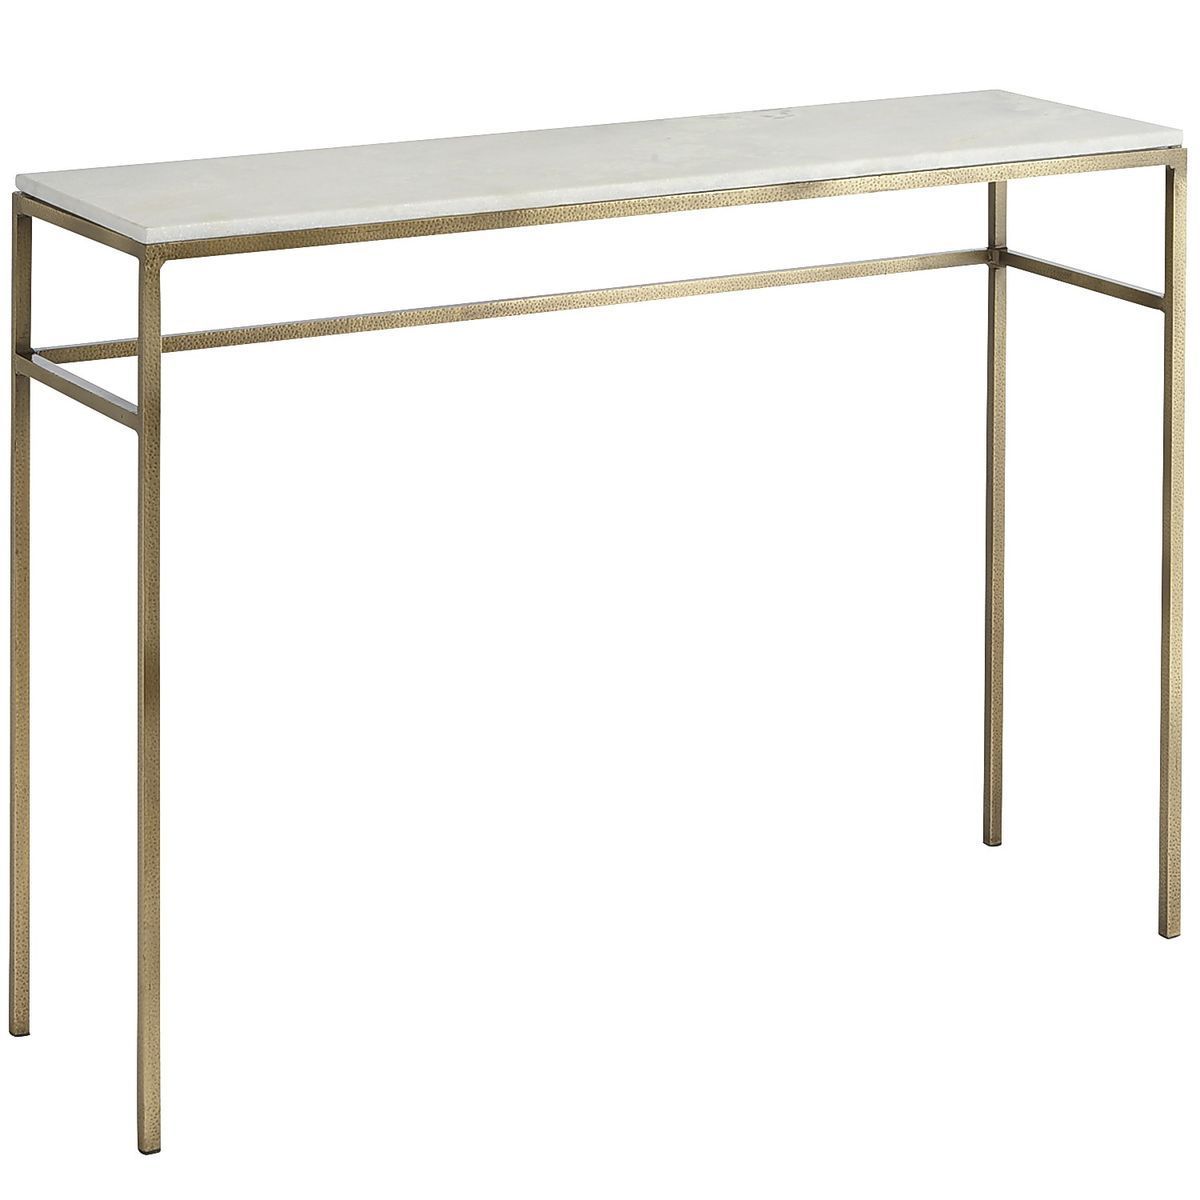 If You're Looking For A Way To Elevate Your Living Space, Ethel Regarding Elke Glass Console Tables With Polished Aluminum Base (View 11 of 30)